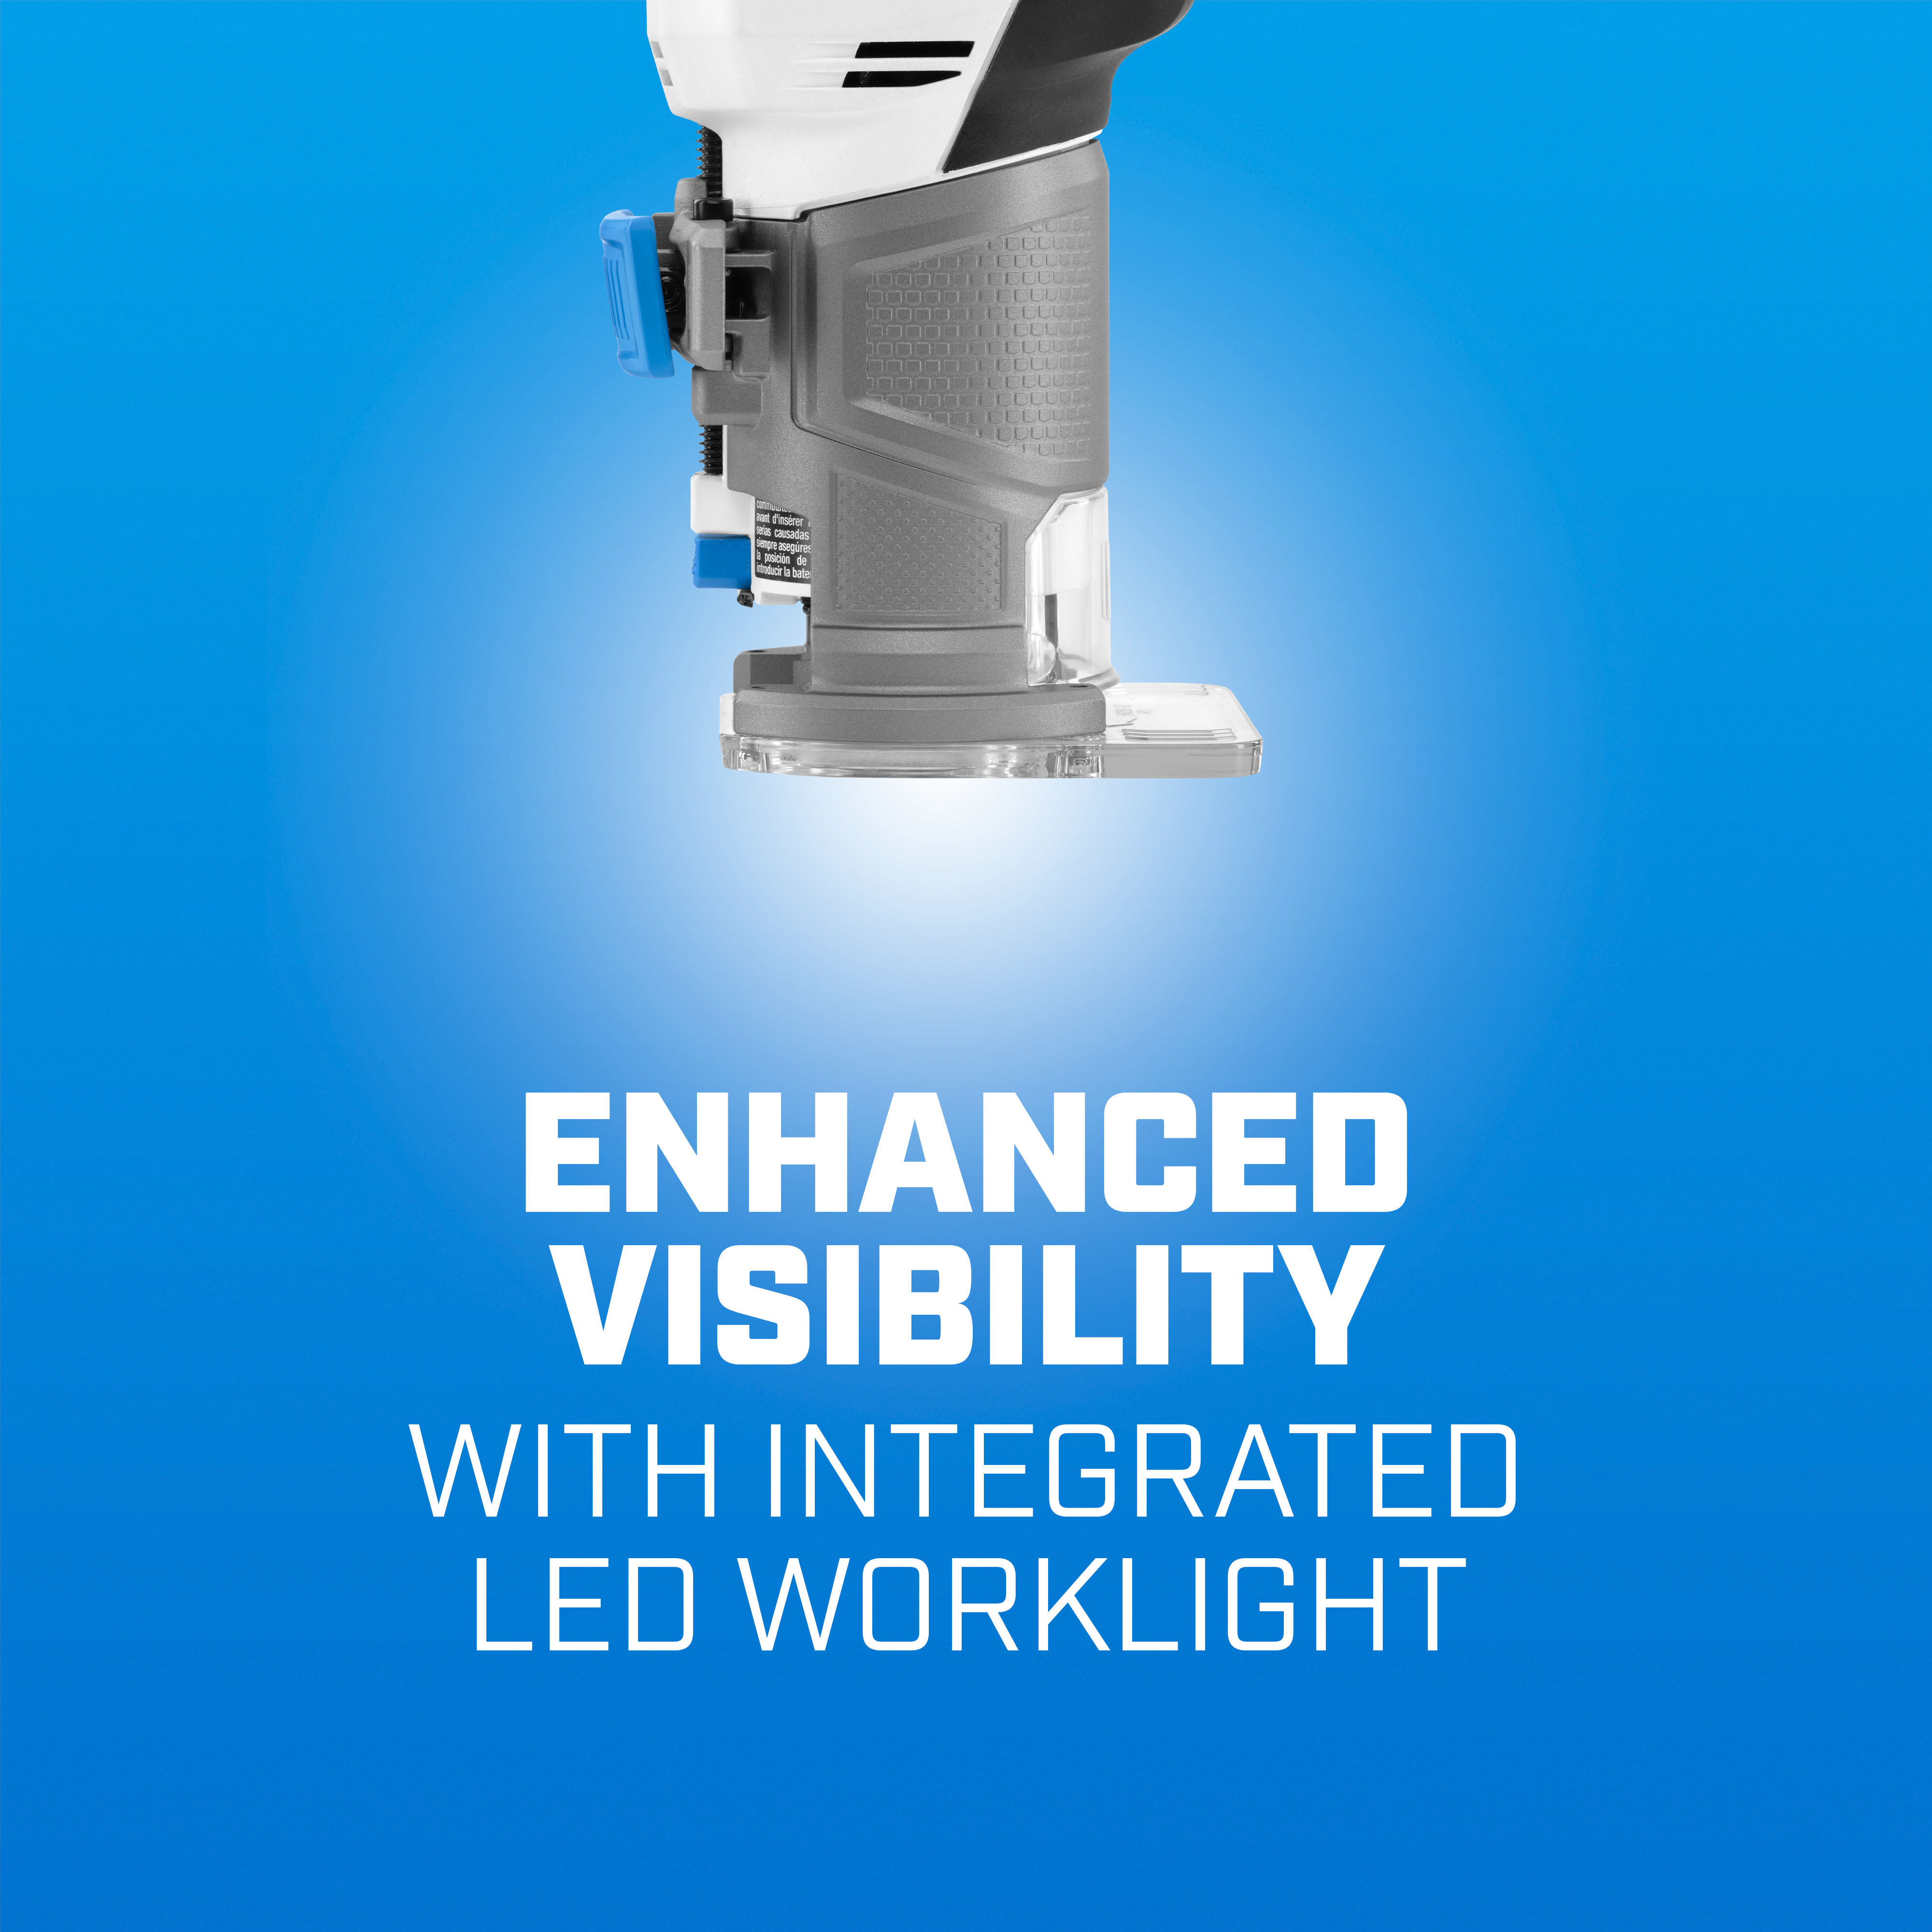 enhanced visibility with integrated LED work light